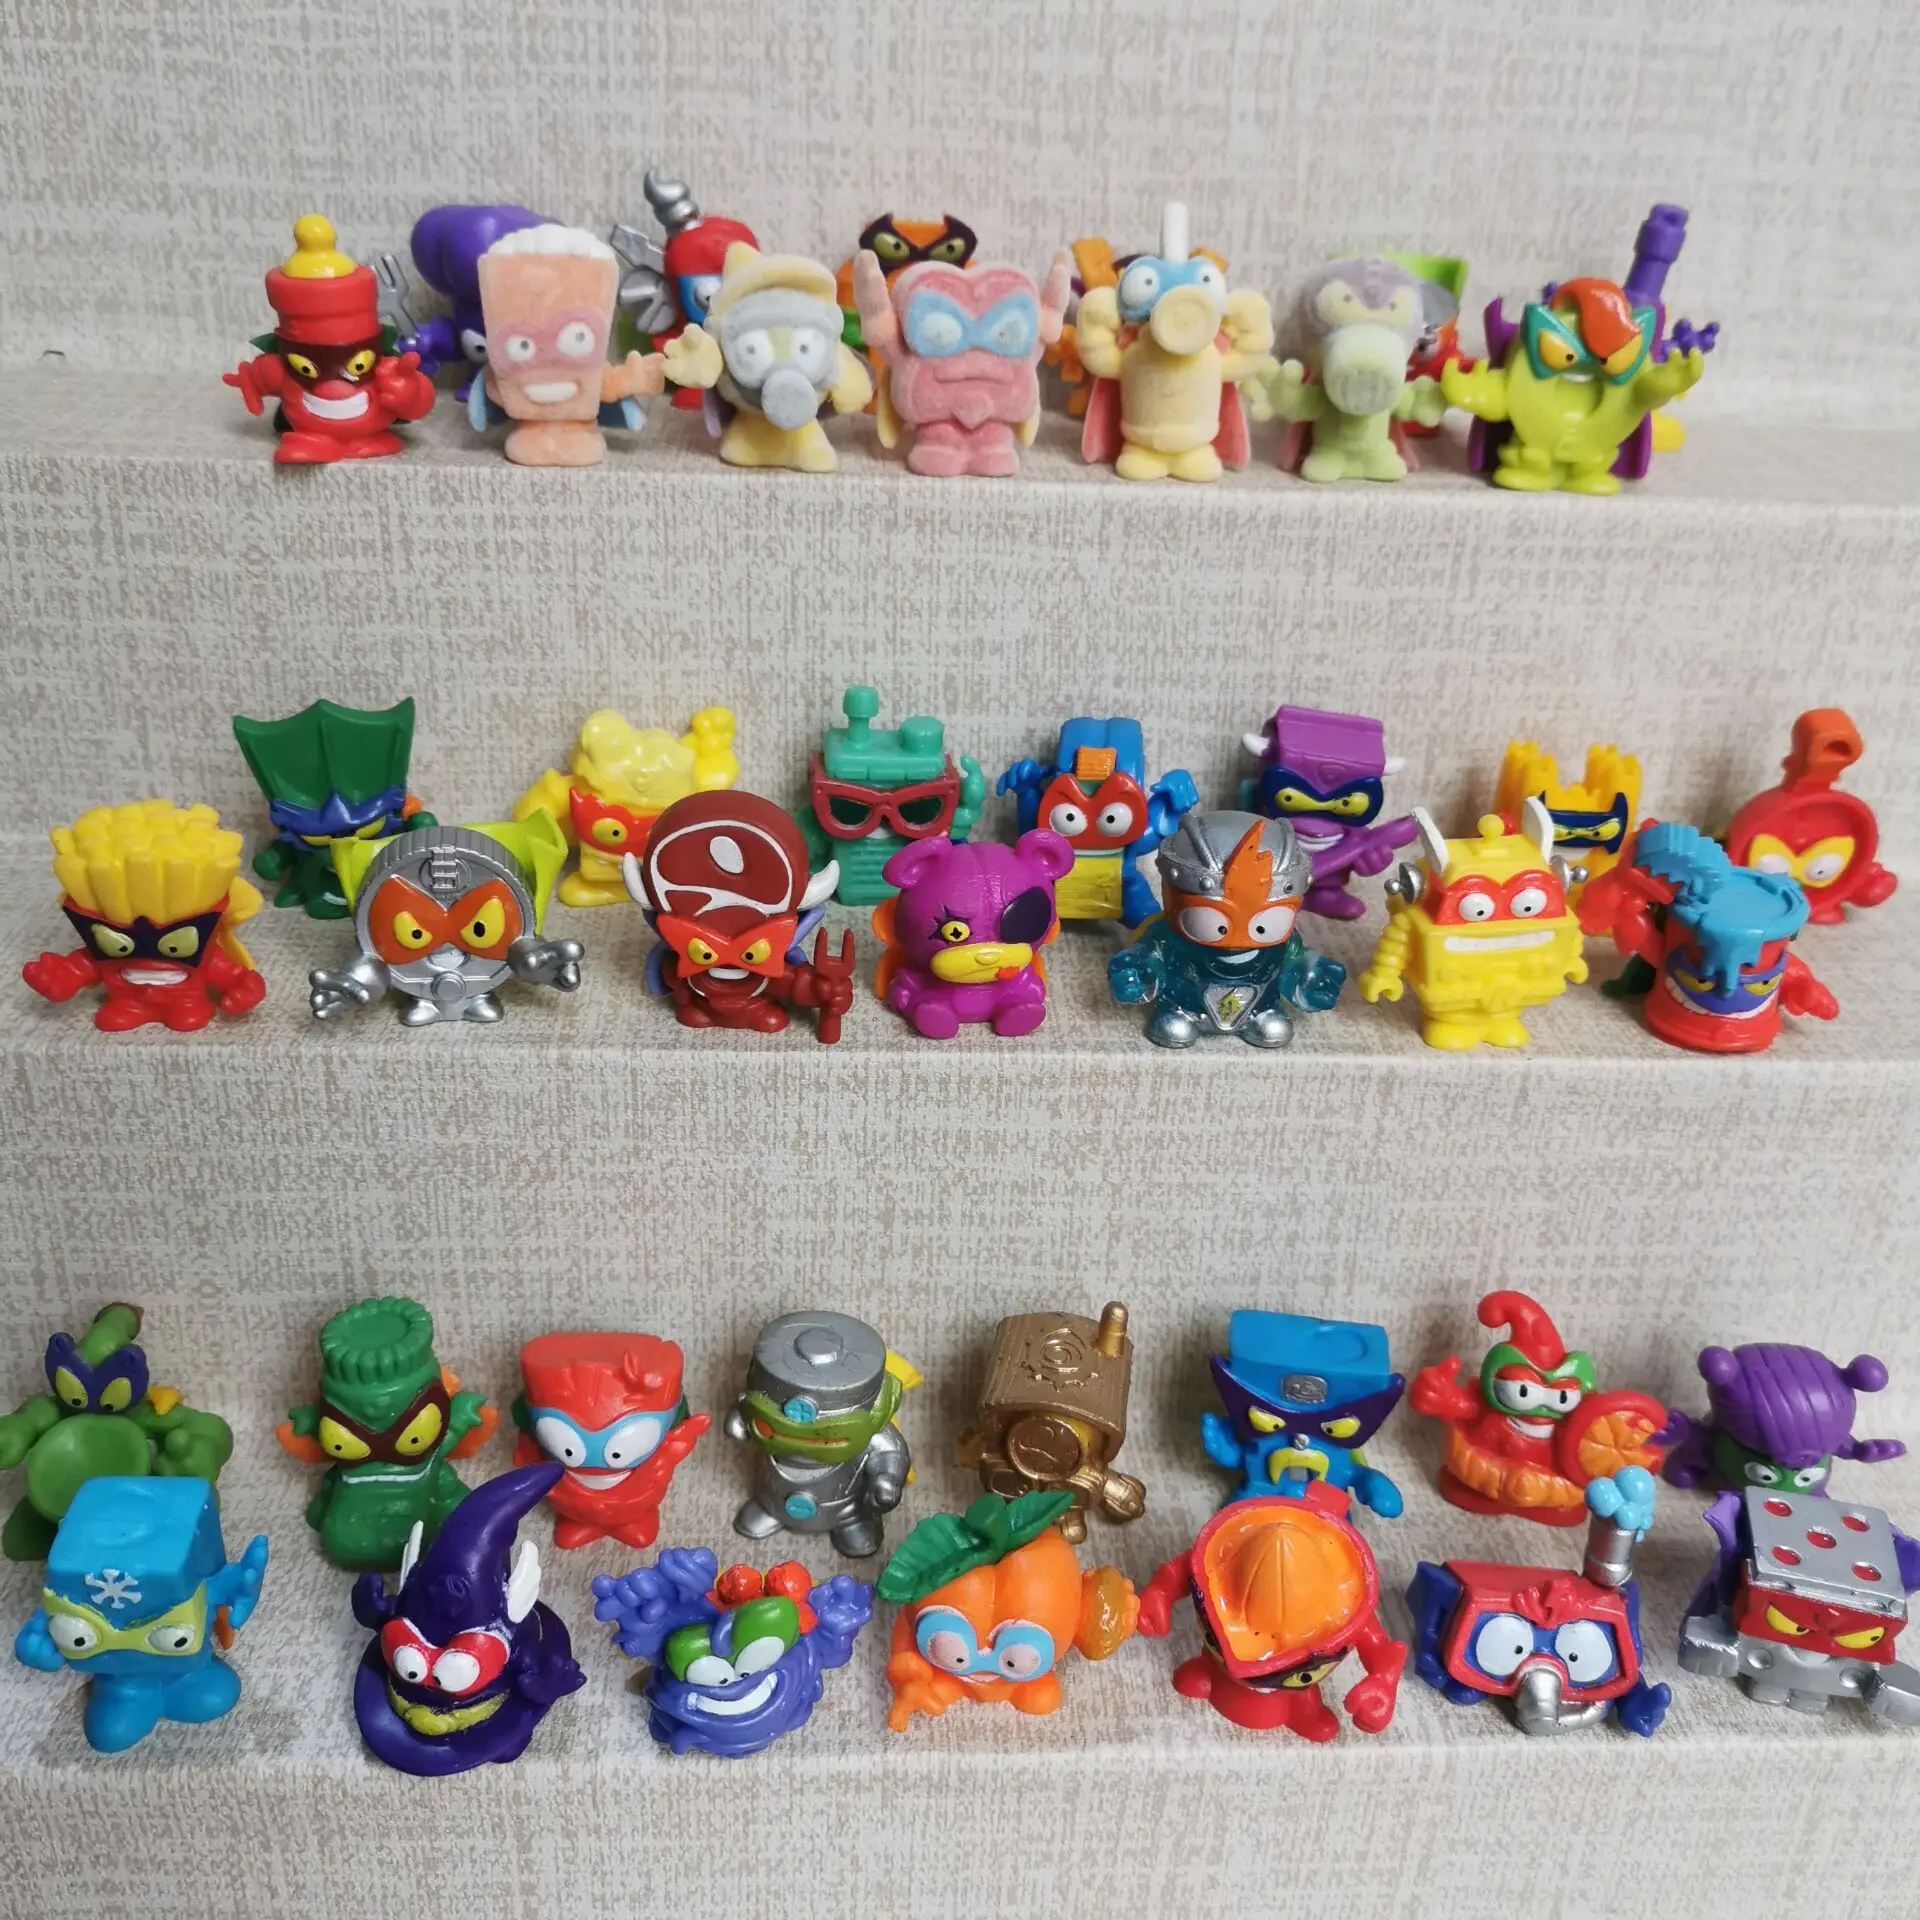 10-50pcs Original Superzings Superthings Action Figures 3CM Super Zings  Garbage Trash Collection Toys Model for Kids Gift - Realistic Reborn Dolls  for Sale